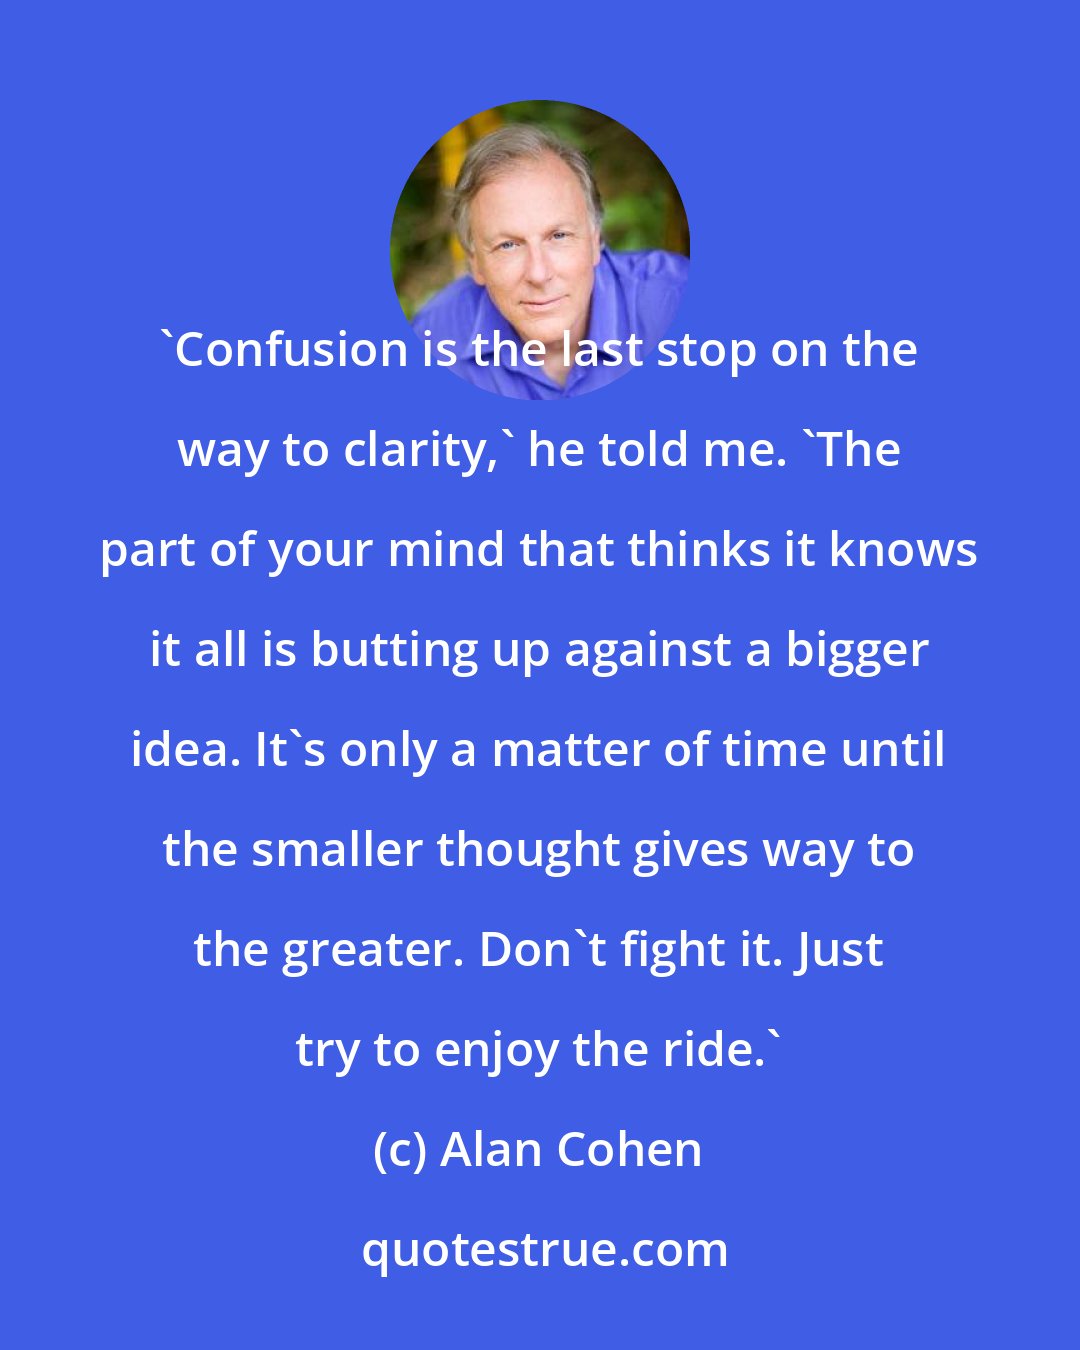 Alan Cohen: 'Confusion is the last stop on the way to clarity,' he told me. 'The part of your mind that thinks it knows it all is butting up against a bigger idea. It's only a matter of time until the smaller thought gives way to the greater. Don't fight it. Just try to enjoy the ride.'